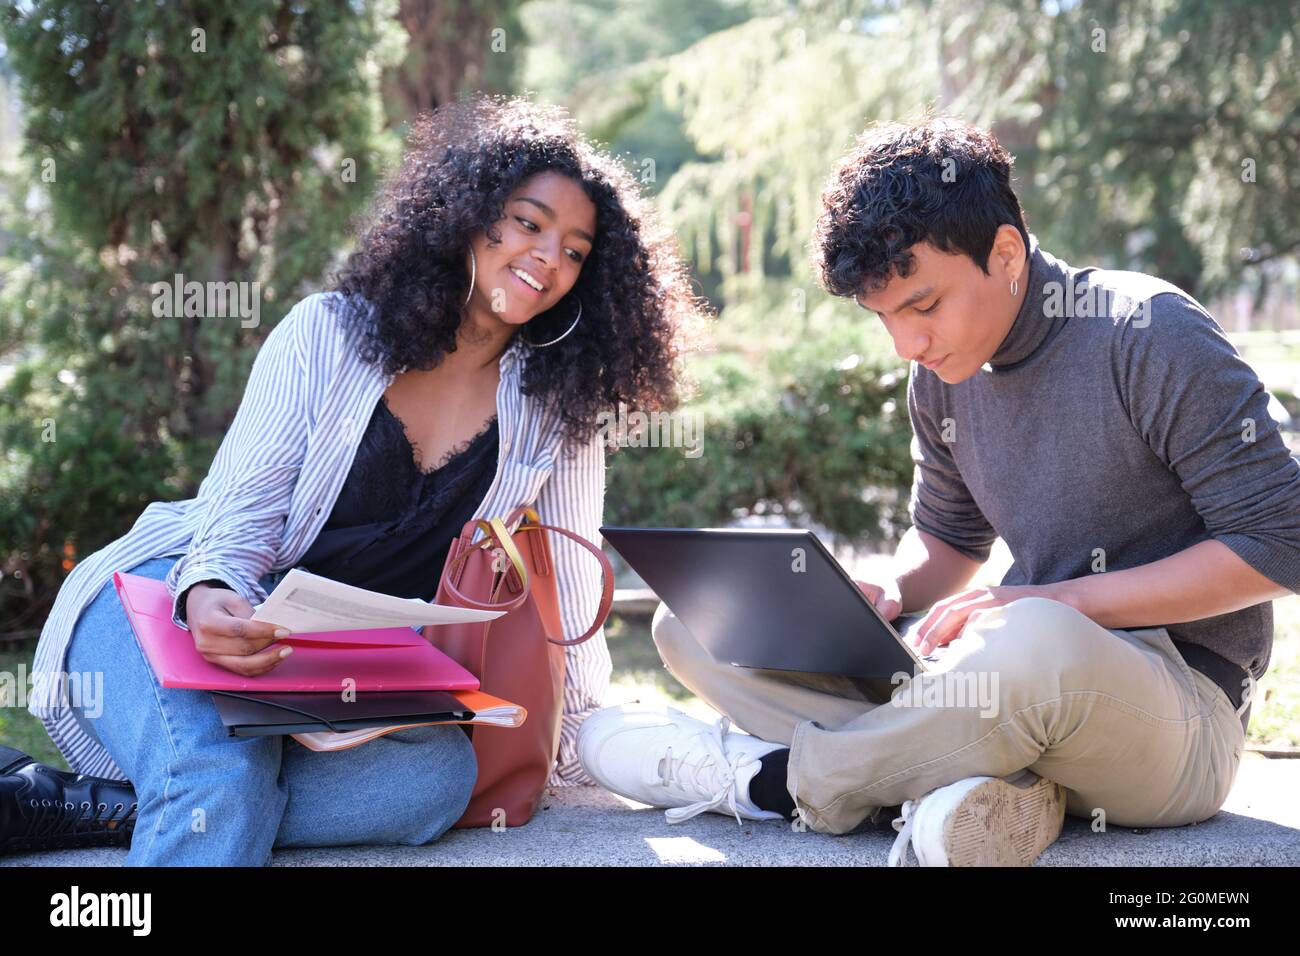 Two latin students smiling studying together sitting on a bench outdoors. University life at campus. Stock Photo